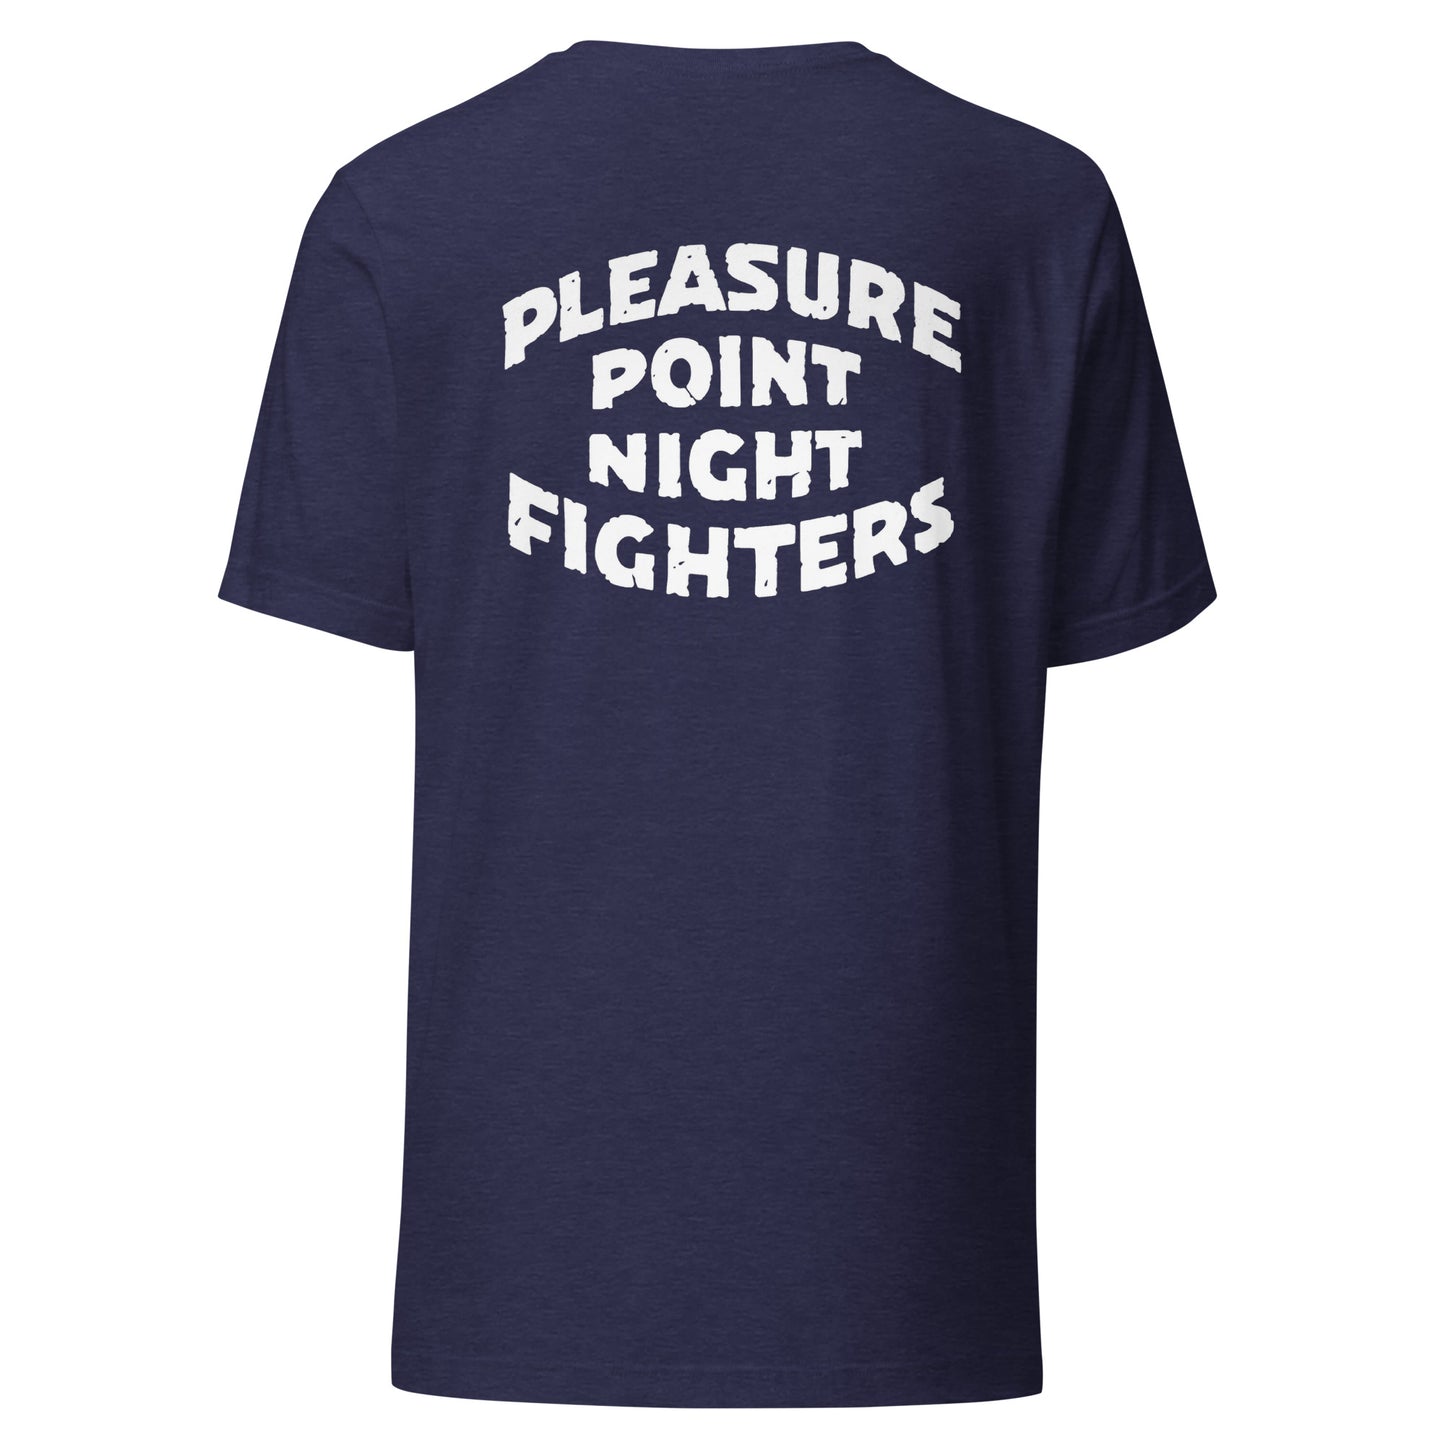 PPPNF - Pleaasure Point Night Fighters - Logo -Unisex t-shirt